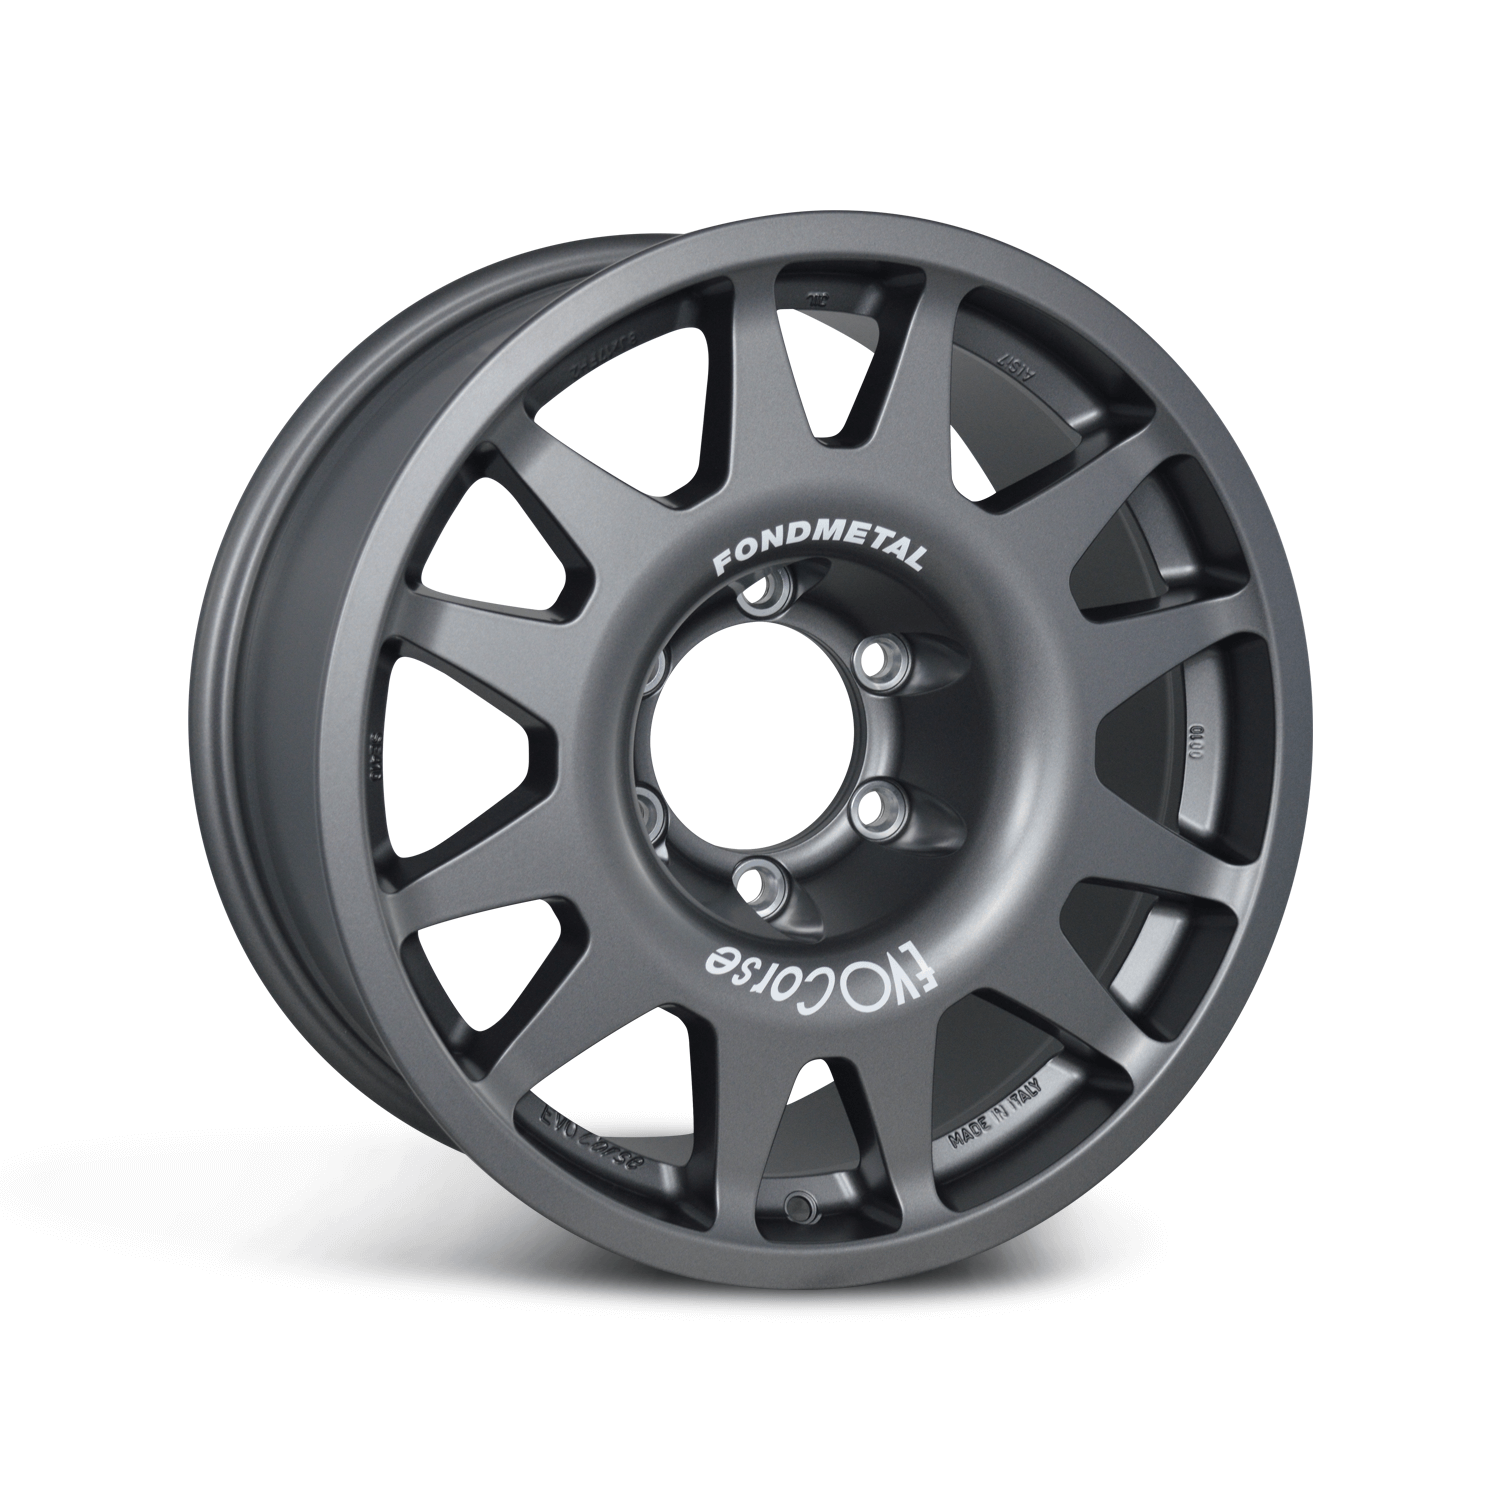 Ineos Grenedier alloy wheel for the grenedier, gloss anthracite by Evo Corse, made in Italy, 17 x 8 inch 45 offset, an alloy race wheel off-road best offset and load rating for the grenadier by Ineos , suits BFG Toyo Falken Good Year etc